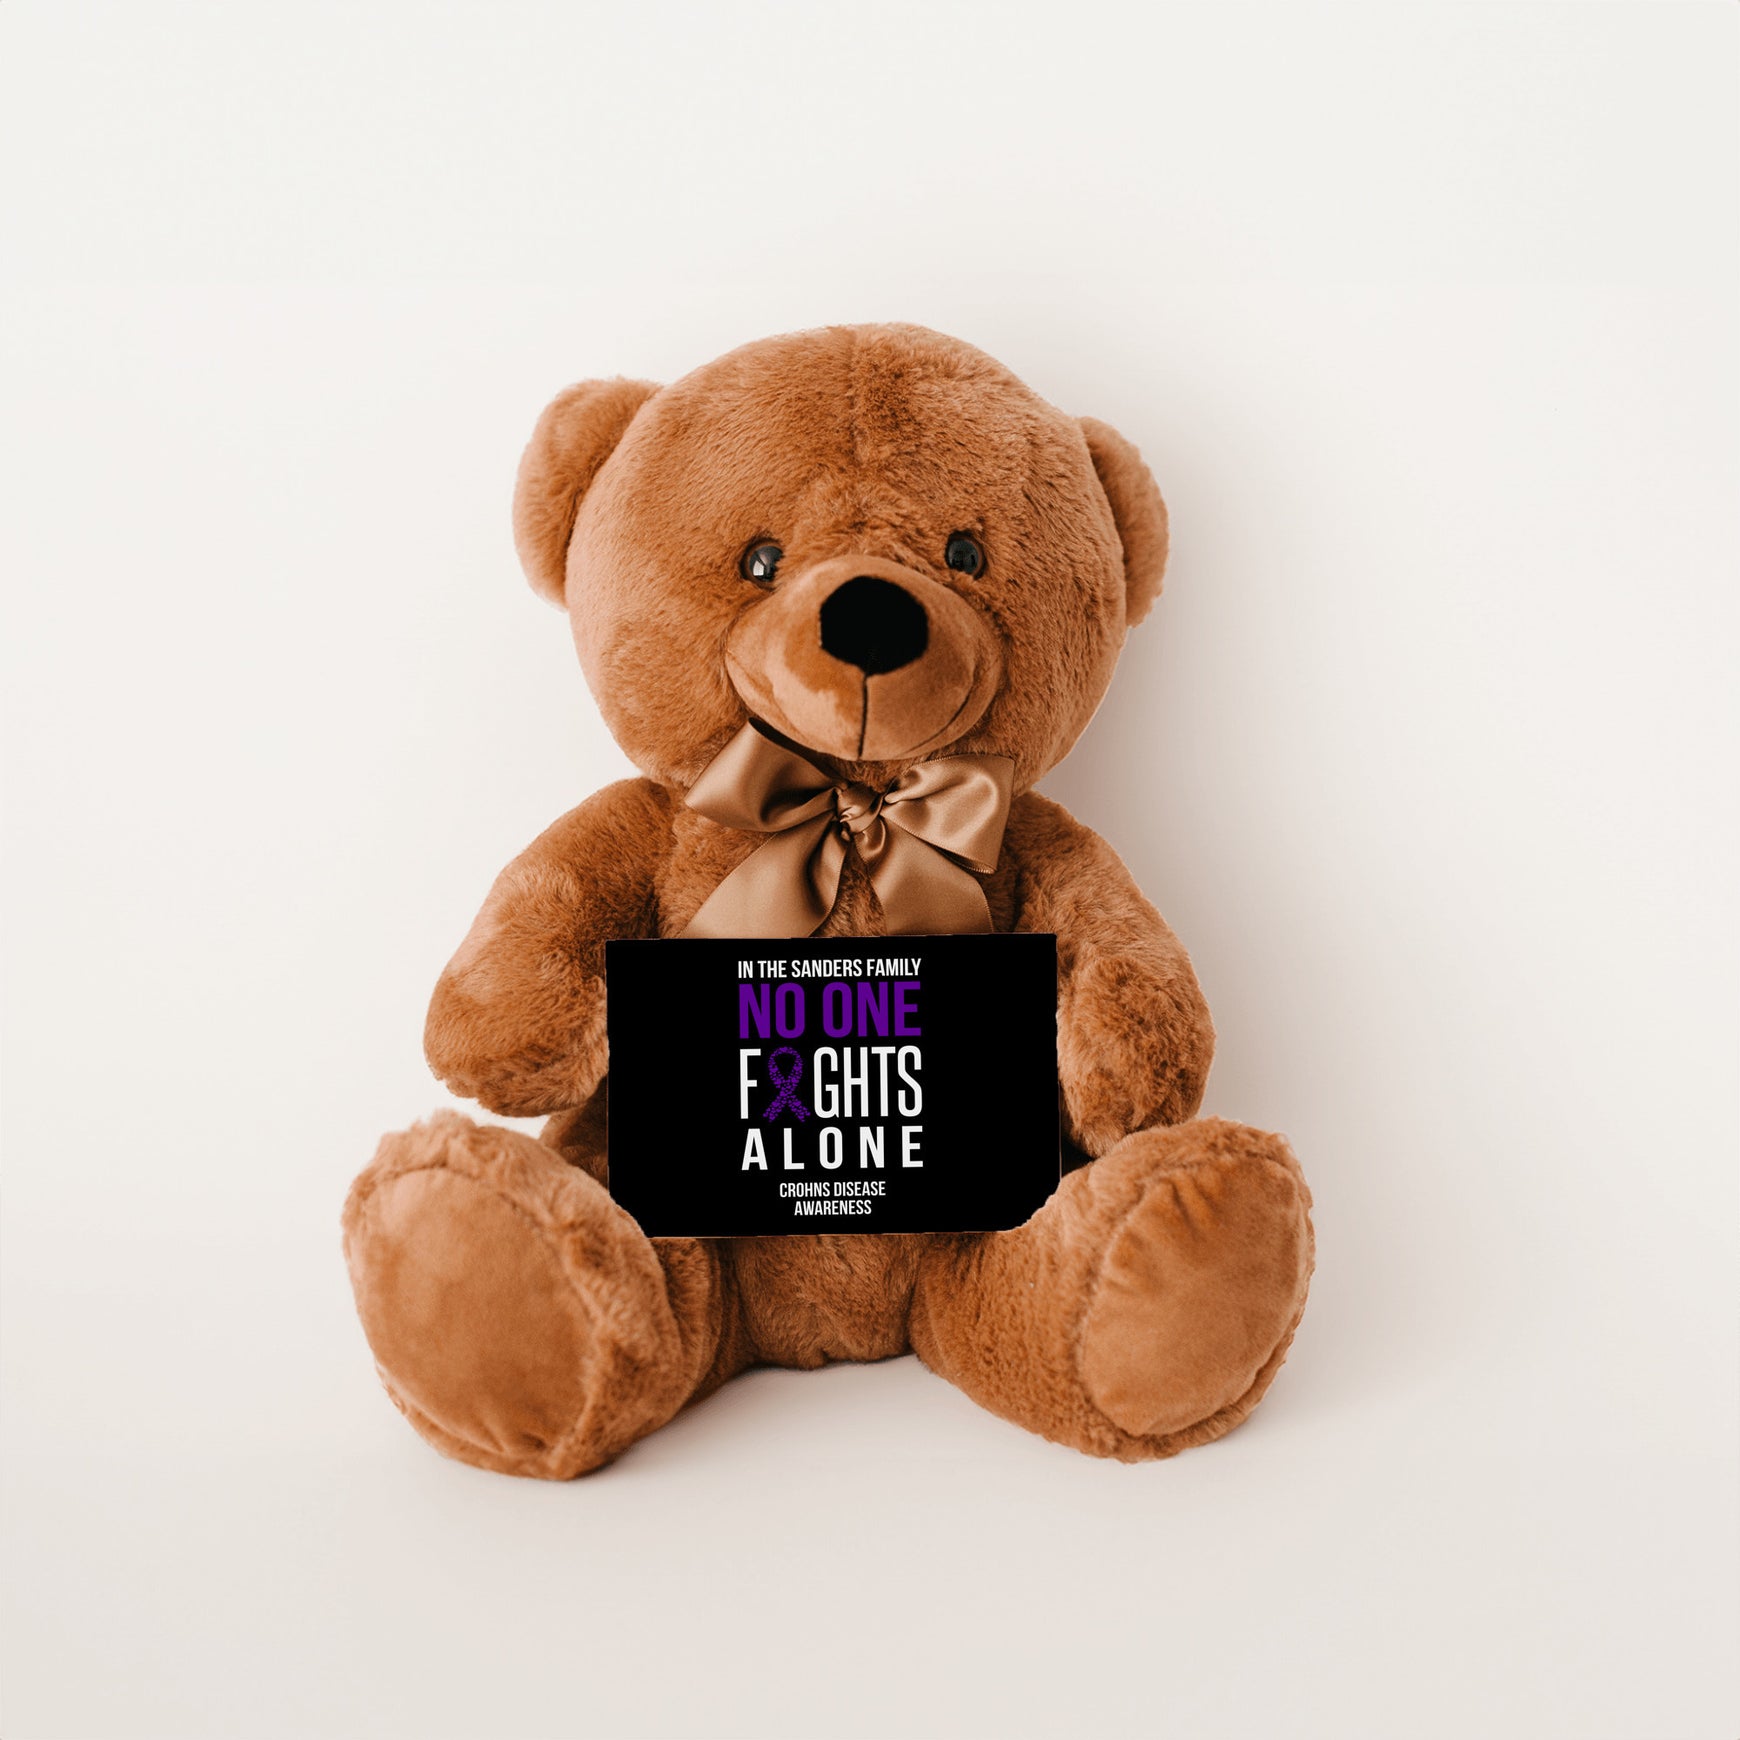 In This Family No One Fights Alone Chron's Disease Teddy Bear - Personalized - PRICE INCLUDES FREE SHIPPING